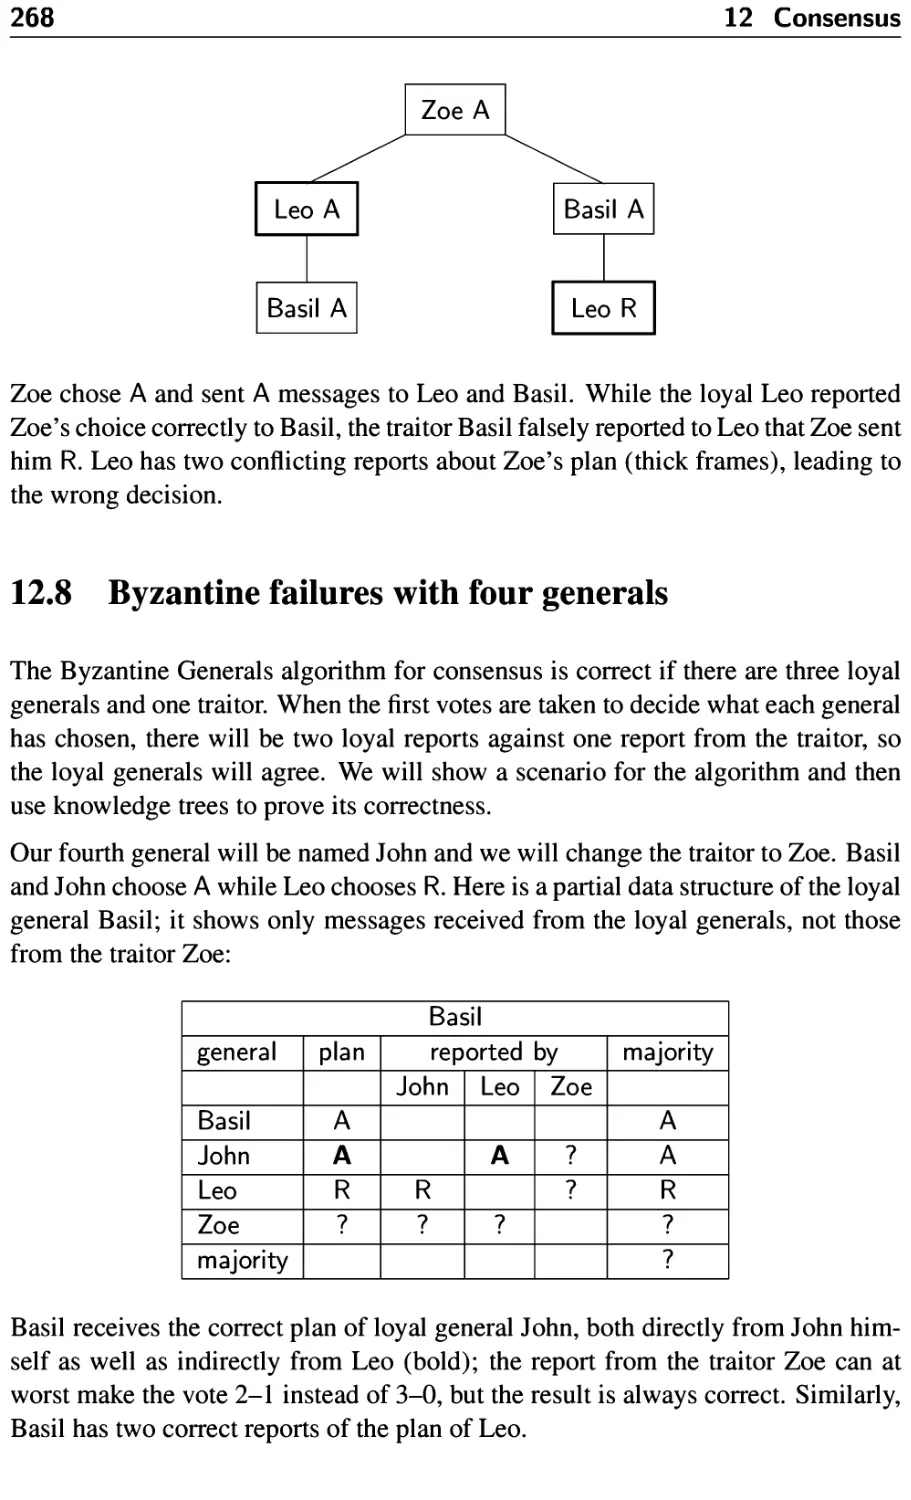 12.8 Byzantine failures with four generals